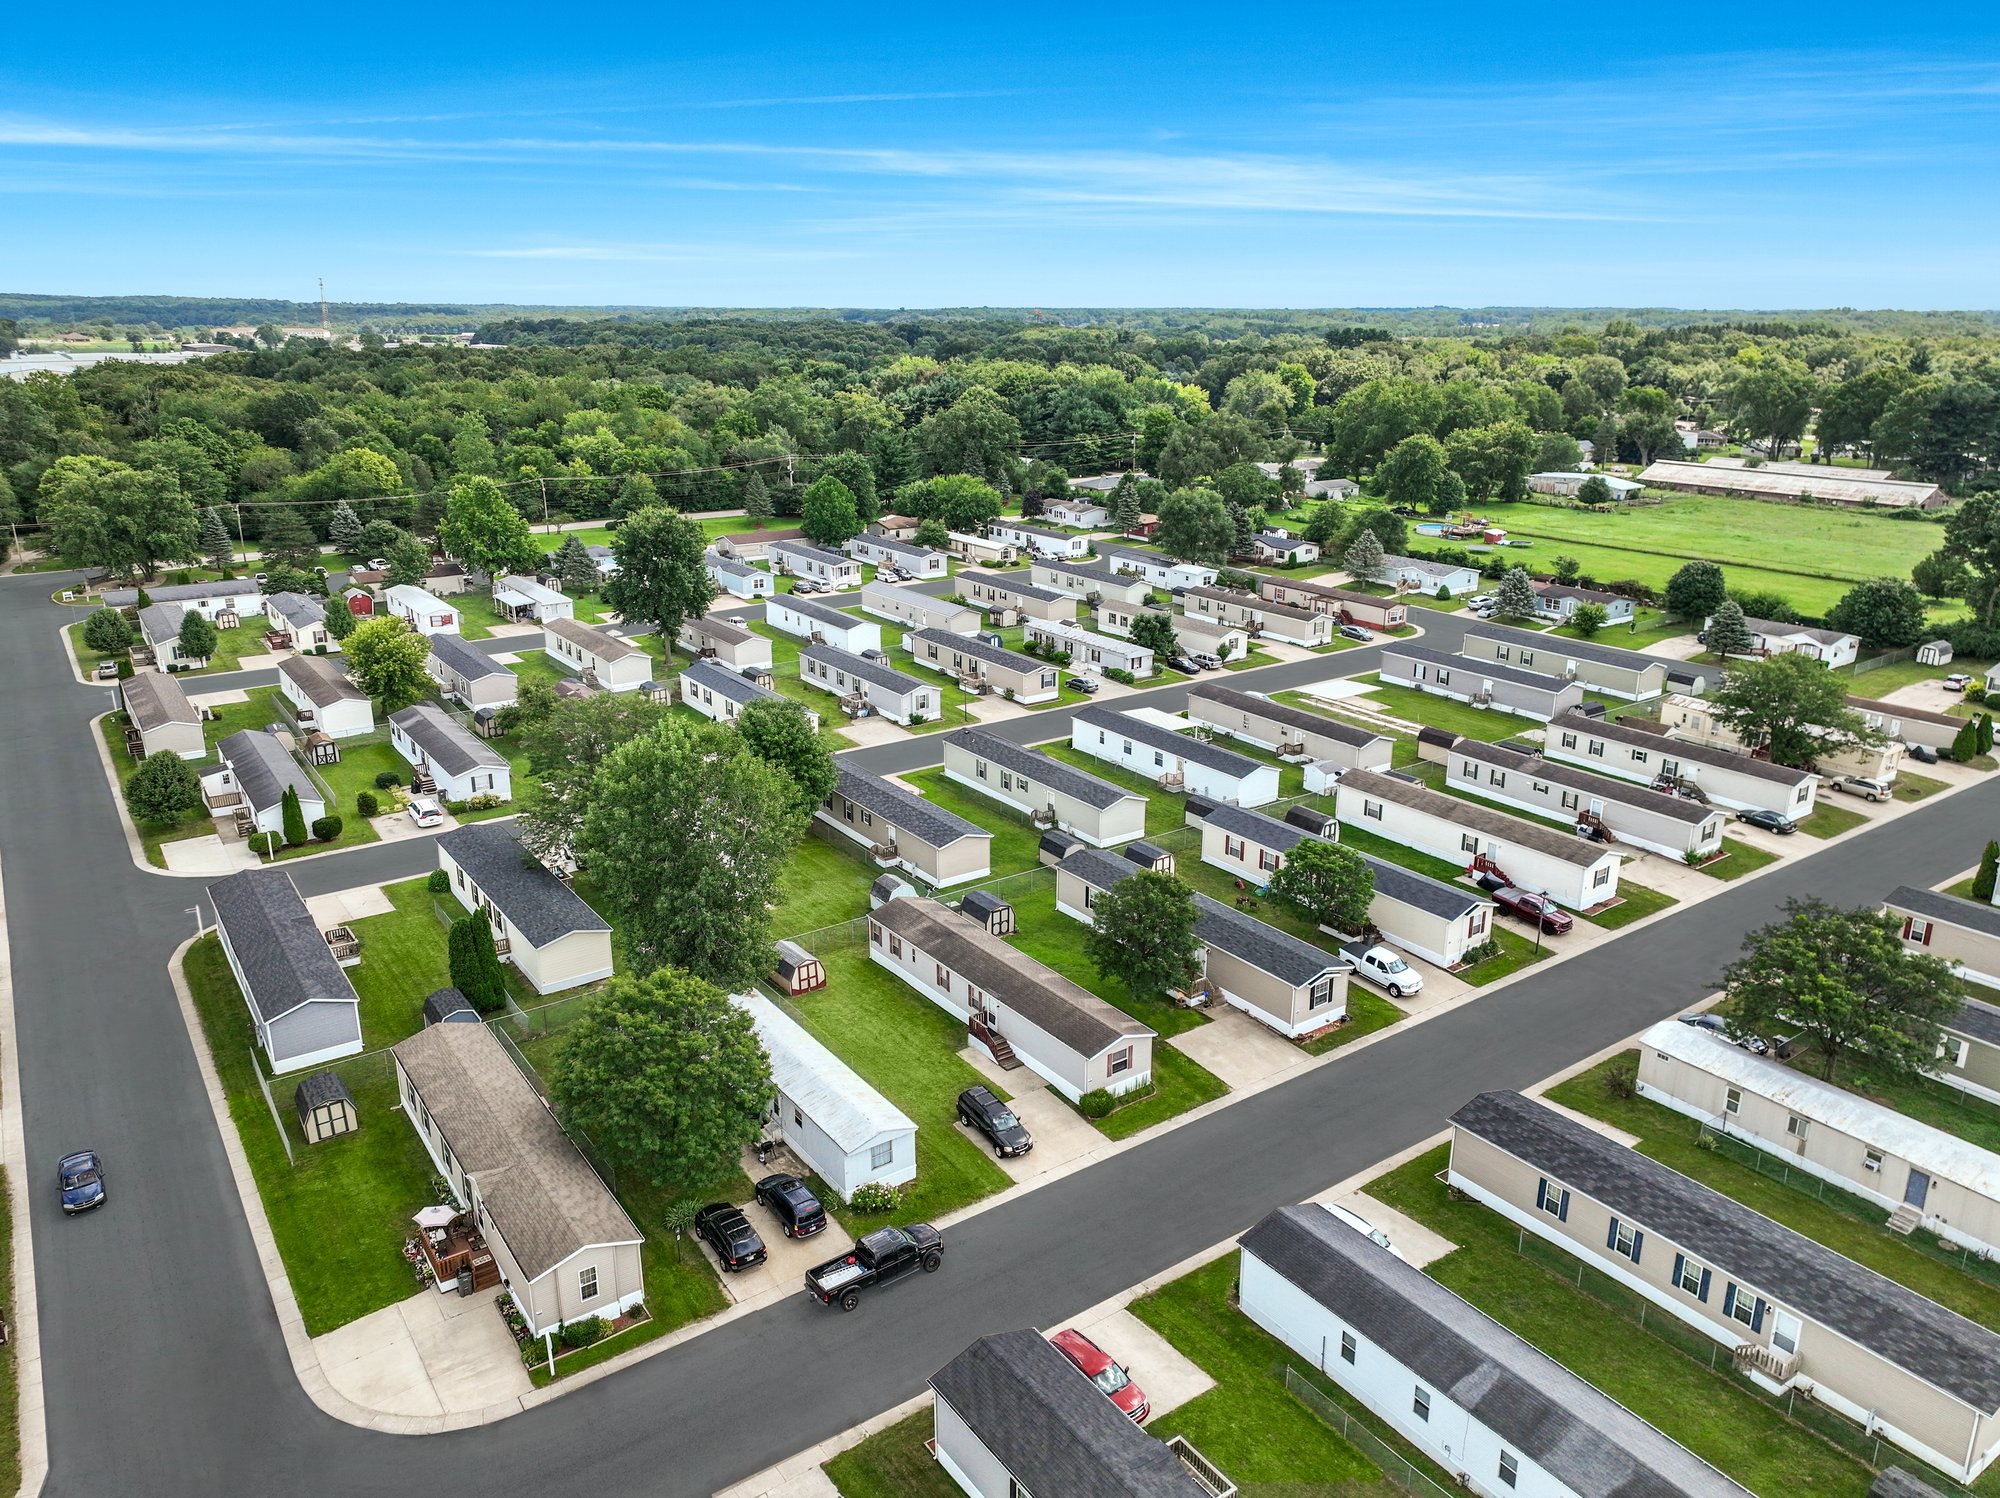 A vibrant manufactured home community